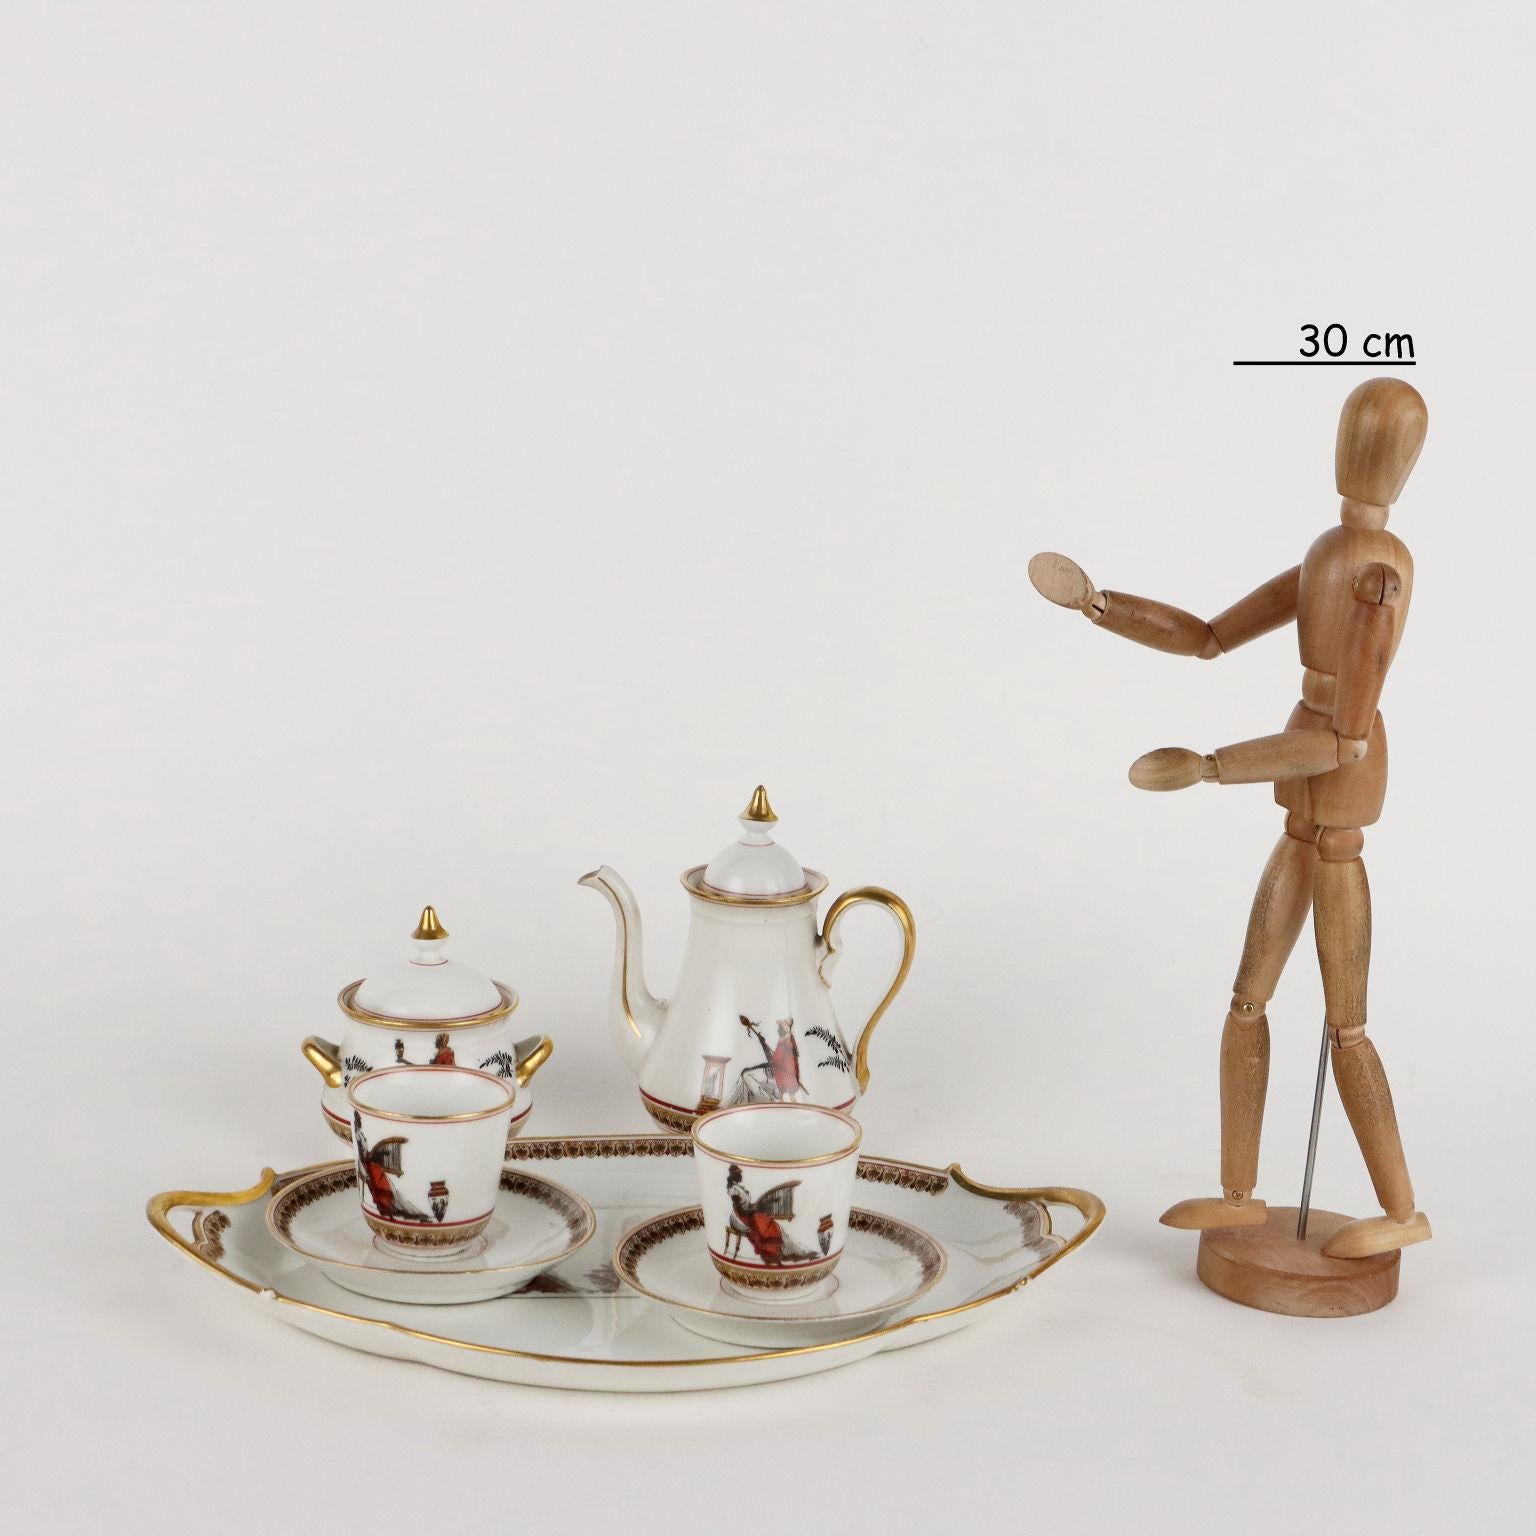 Ginori porcelain tete a tete service with decoration executed by the Richard Ginori manufactory. Decoration with retouché decal with mythological motif. Manufacture mark under the bases. Service consisting of coffee pot, sugar bowl, two cups and